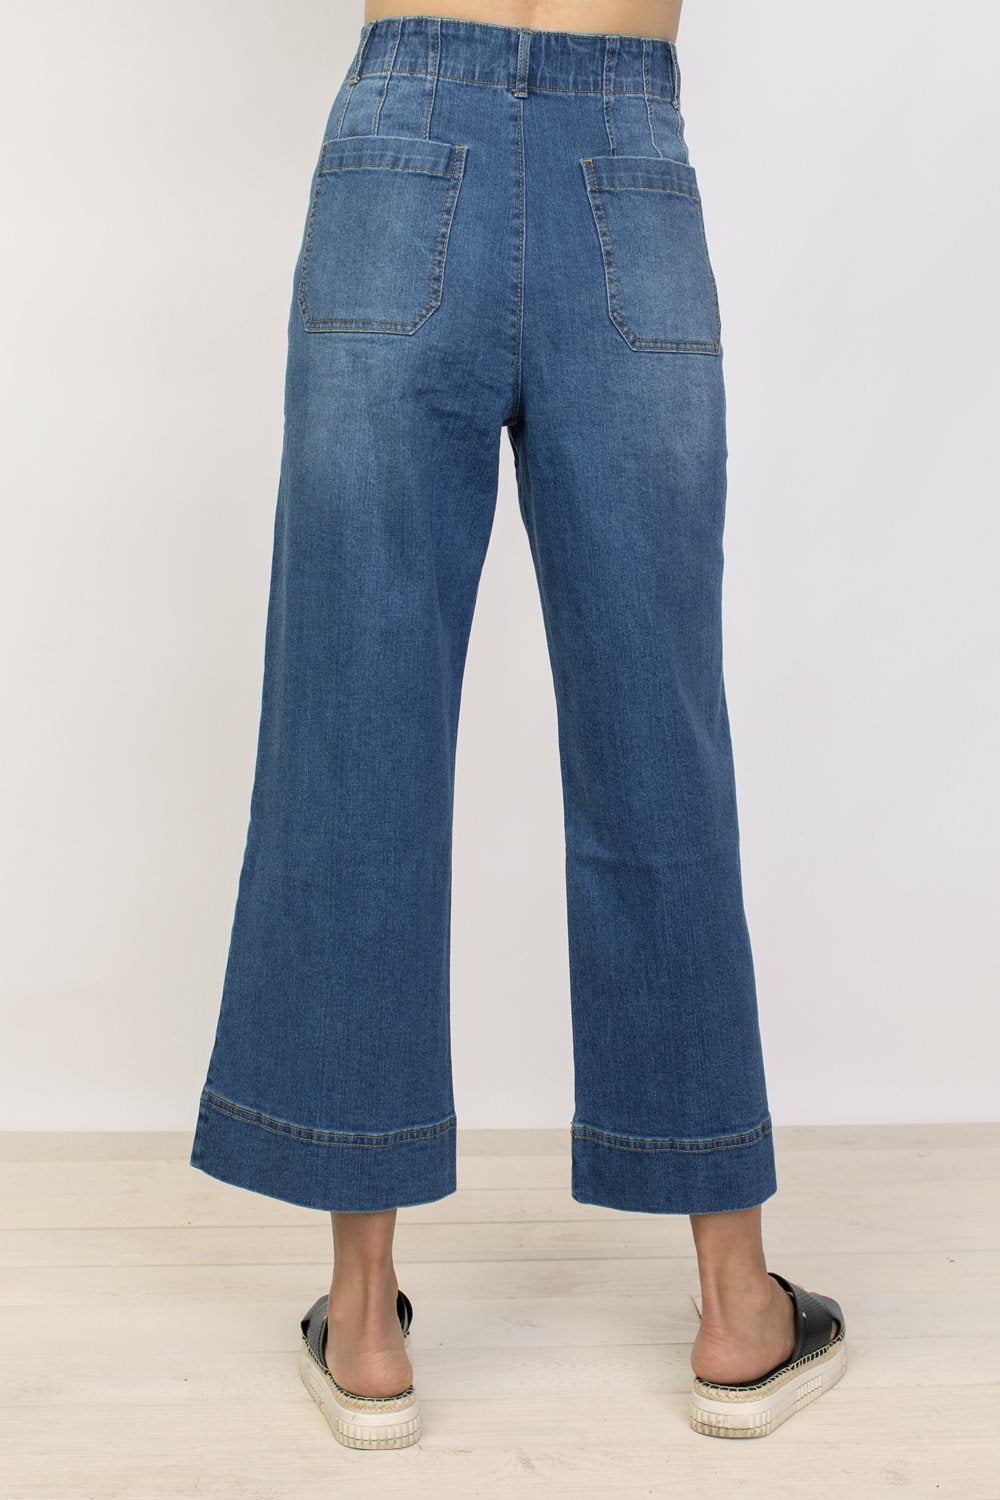 The Perfect Crop Jean in Denim by Habitat Clothing